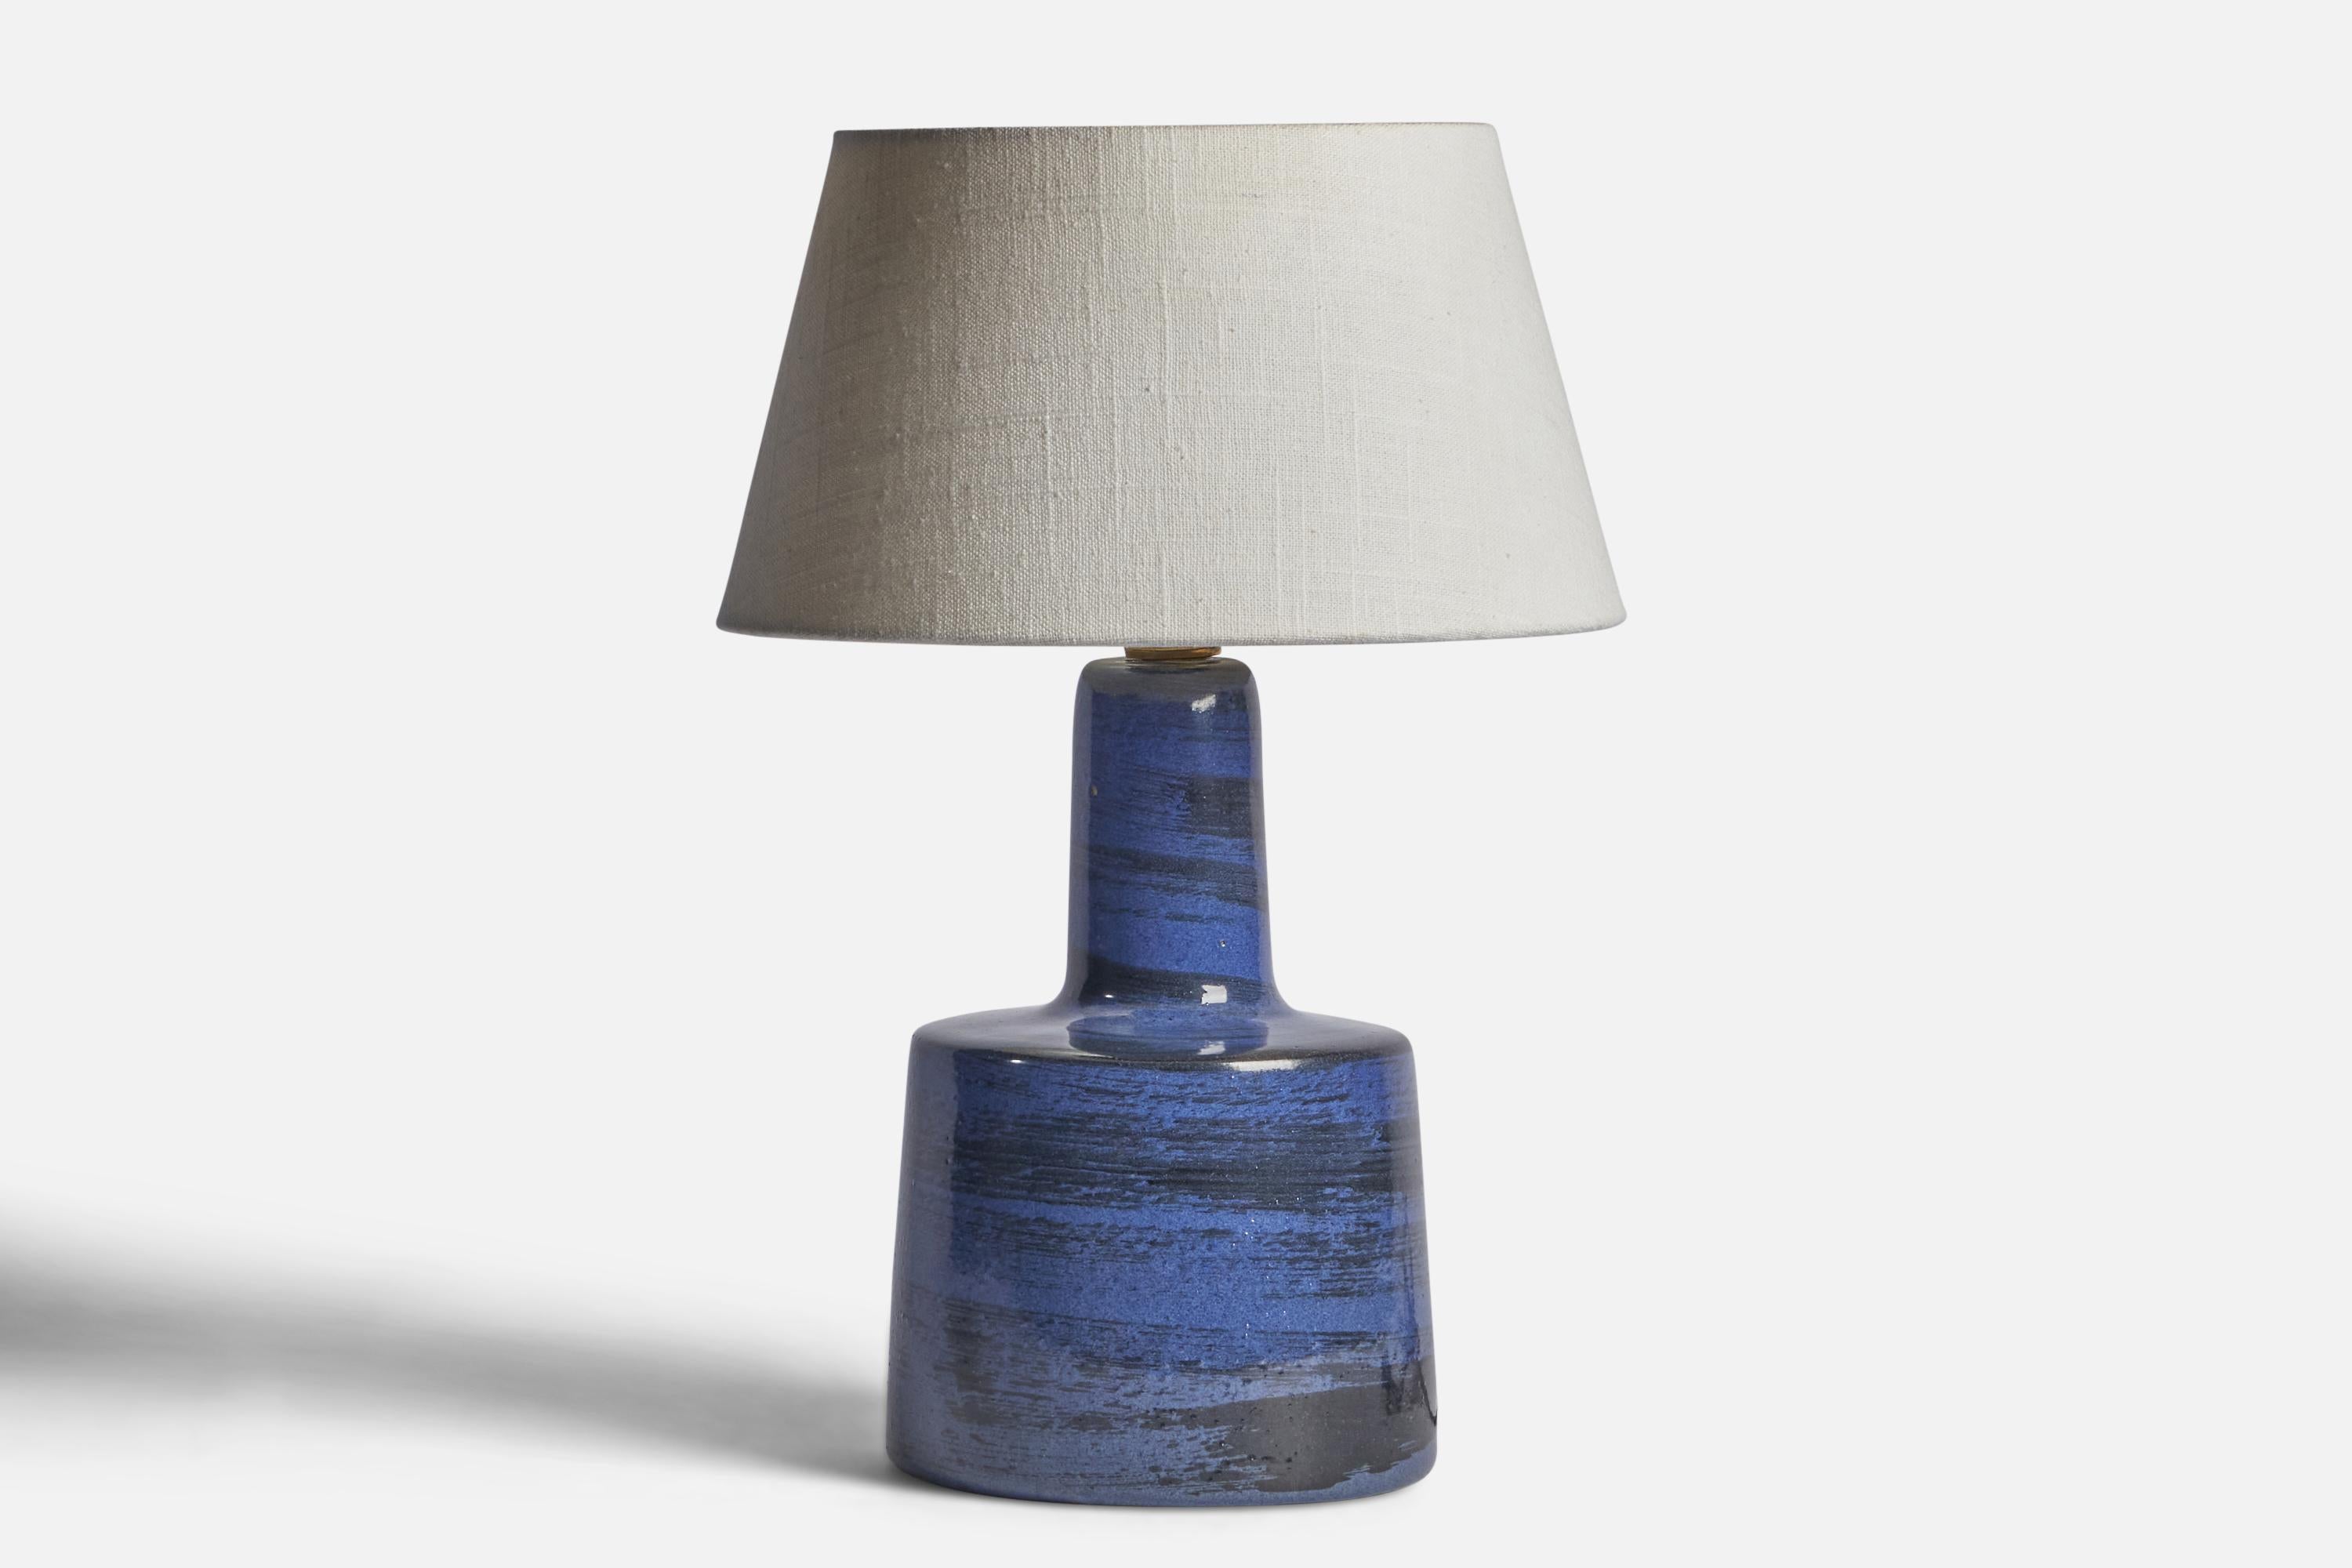 A blue-glazed ceramic table lamp designed by Jane & Gordon Martz and produced by Marshall Studios, USA, 1960s.

Dimensions of Lamp (inches): 12” H x 6.25” Diameter
Dimensions of Shade (inches): 7” Top Diameter x 10” Bottom Diameter x 5.5” H